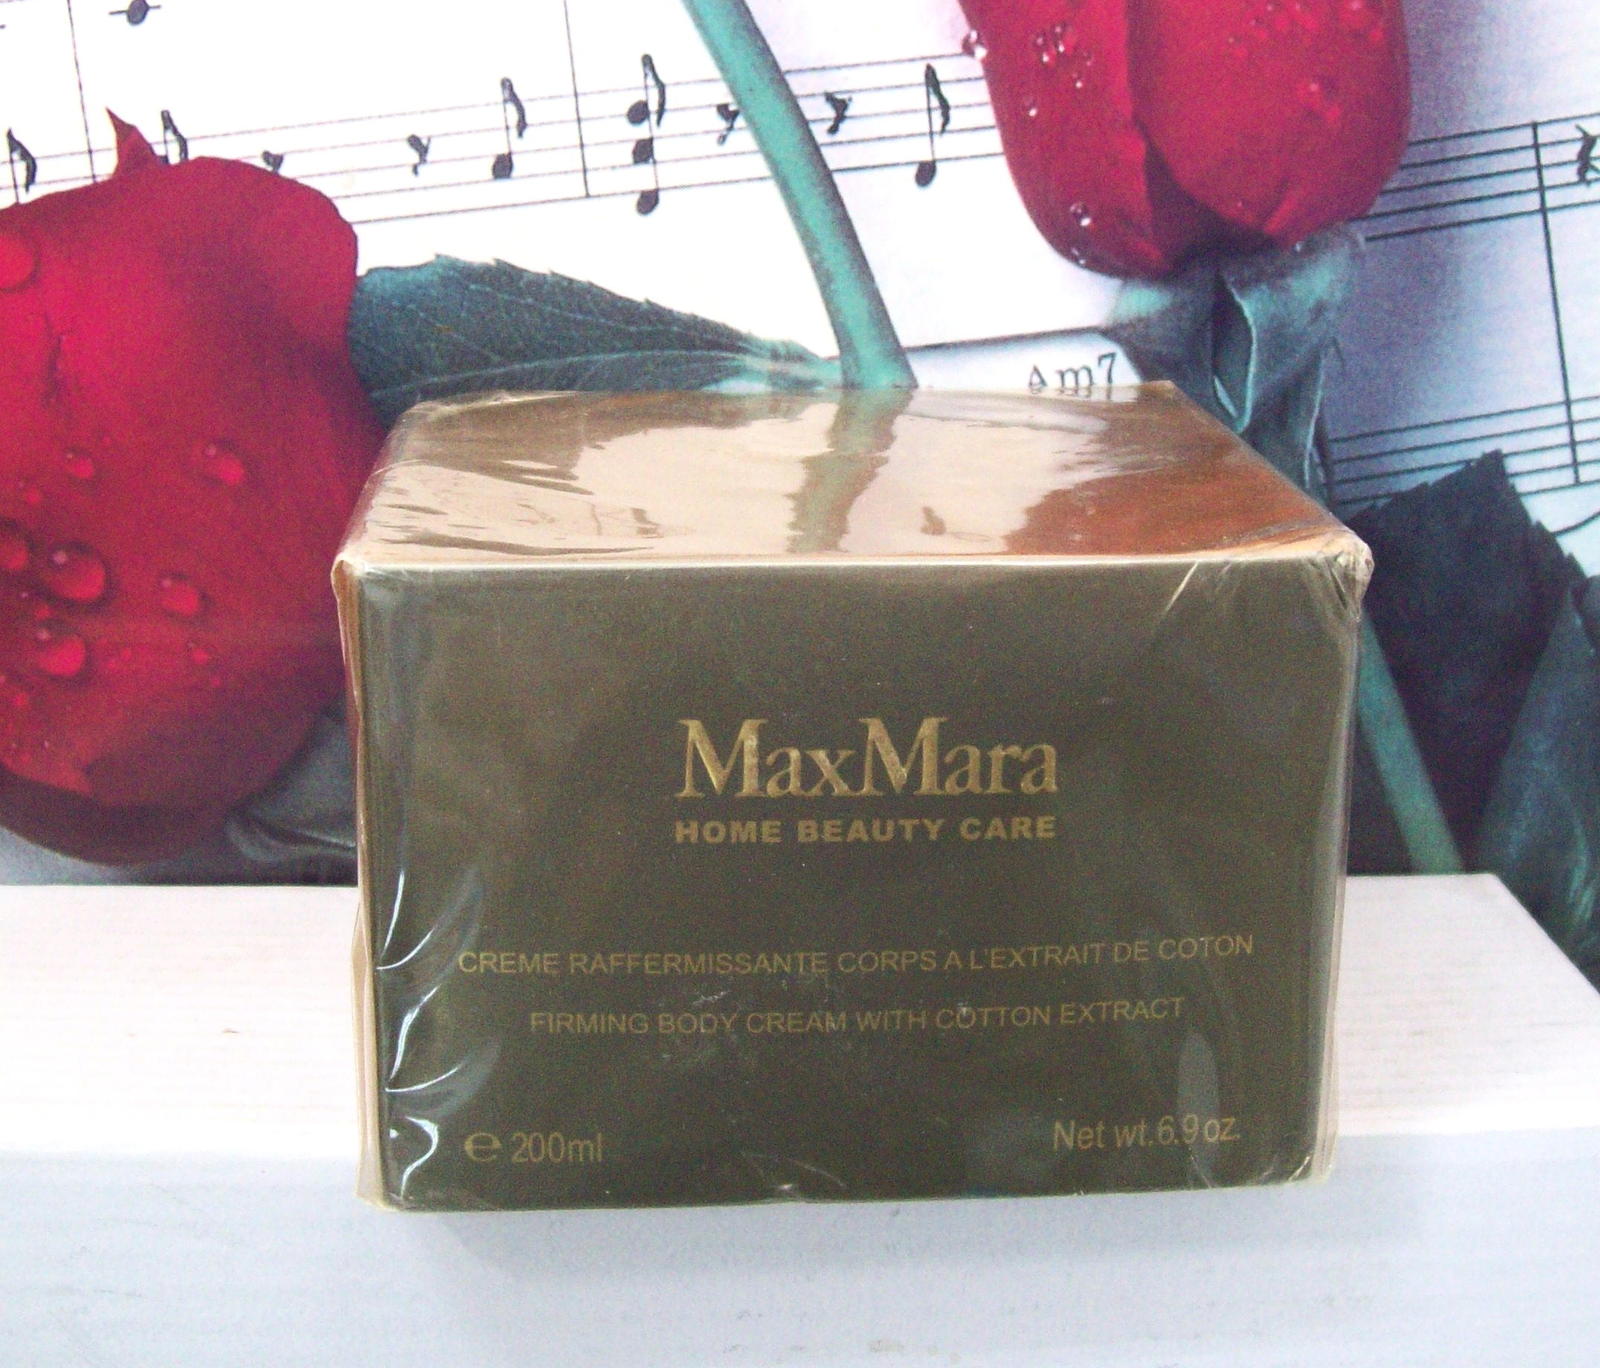 Max Mara Firming Body Cream With Cotton Extract 6.9 FL. OZ. - $119.99